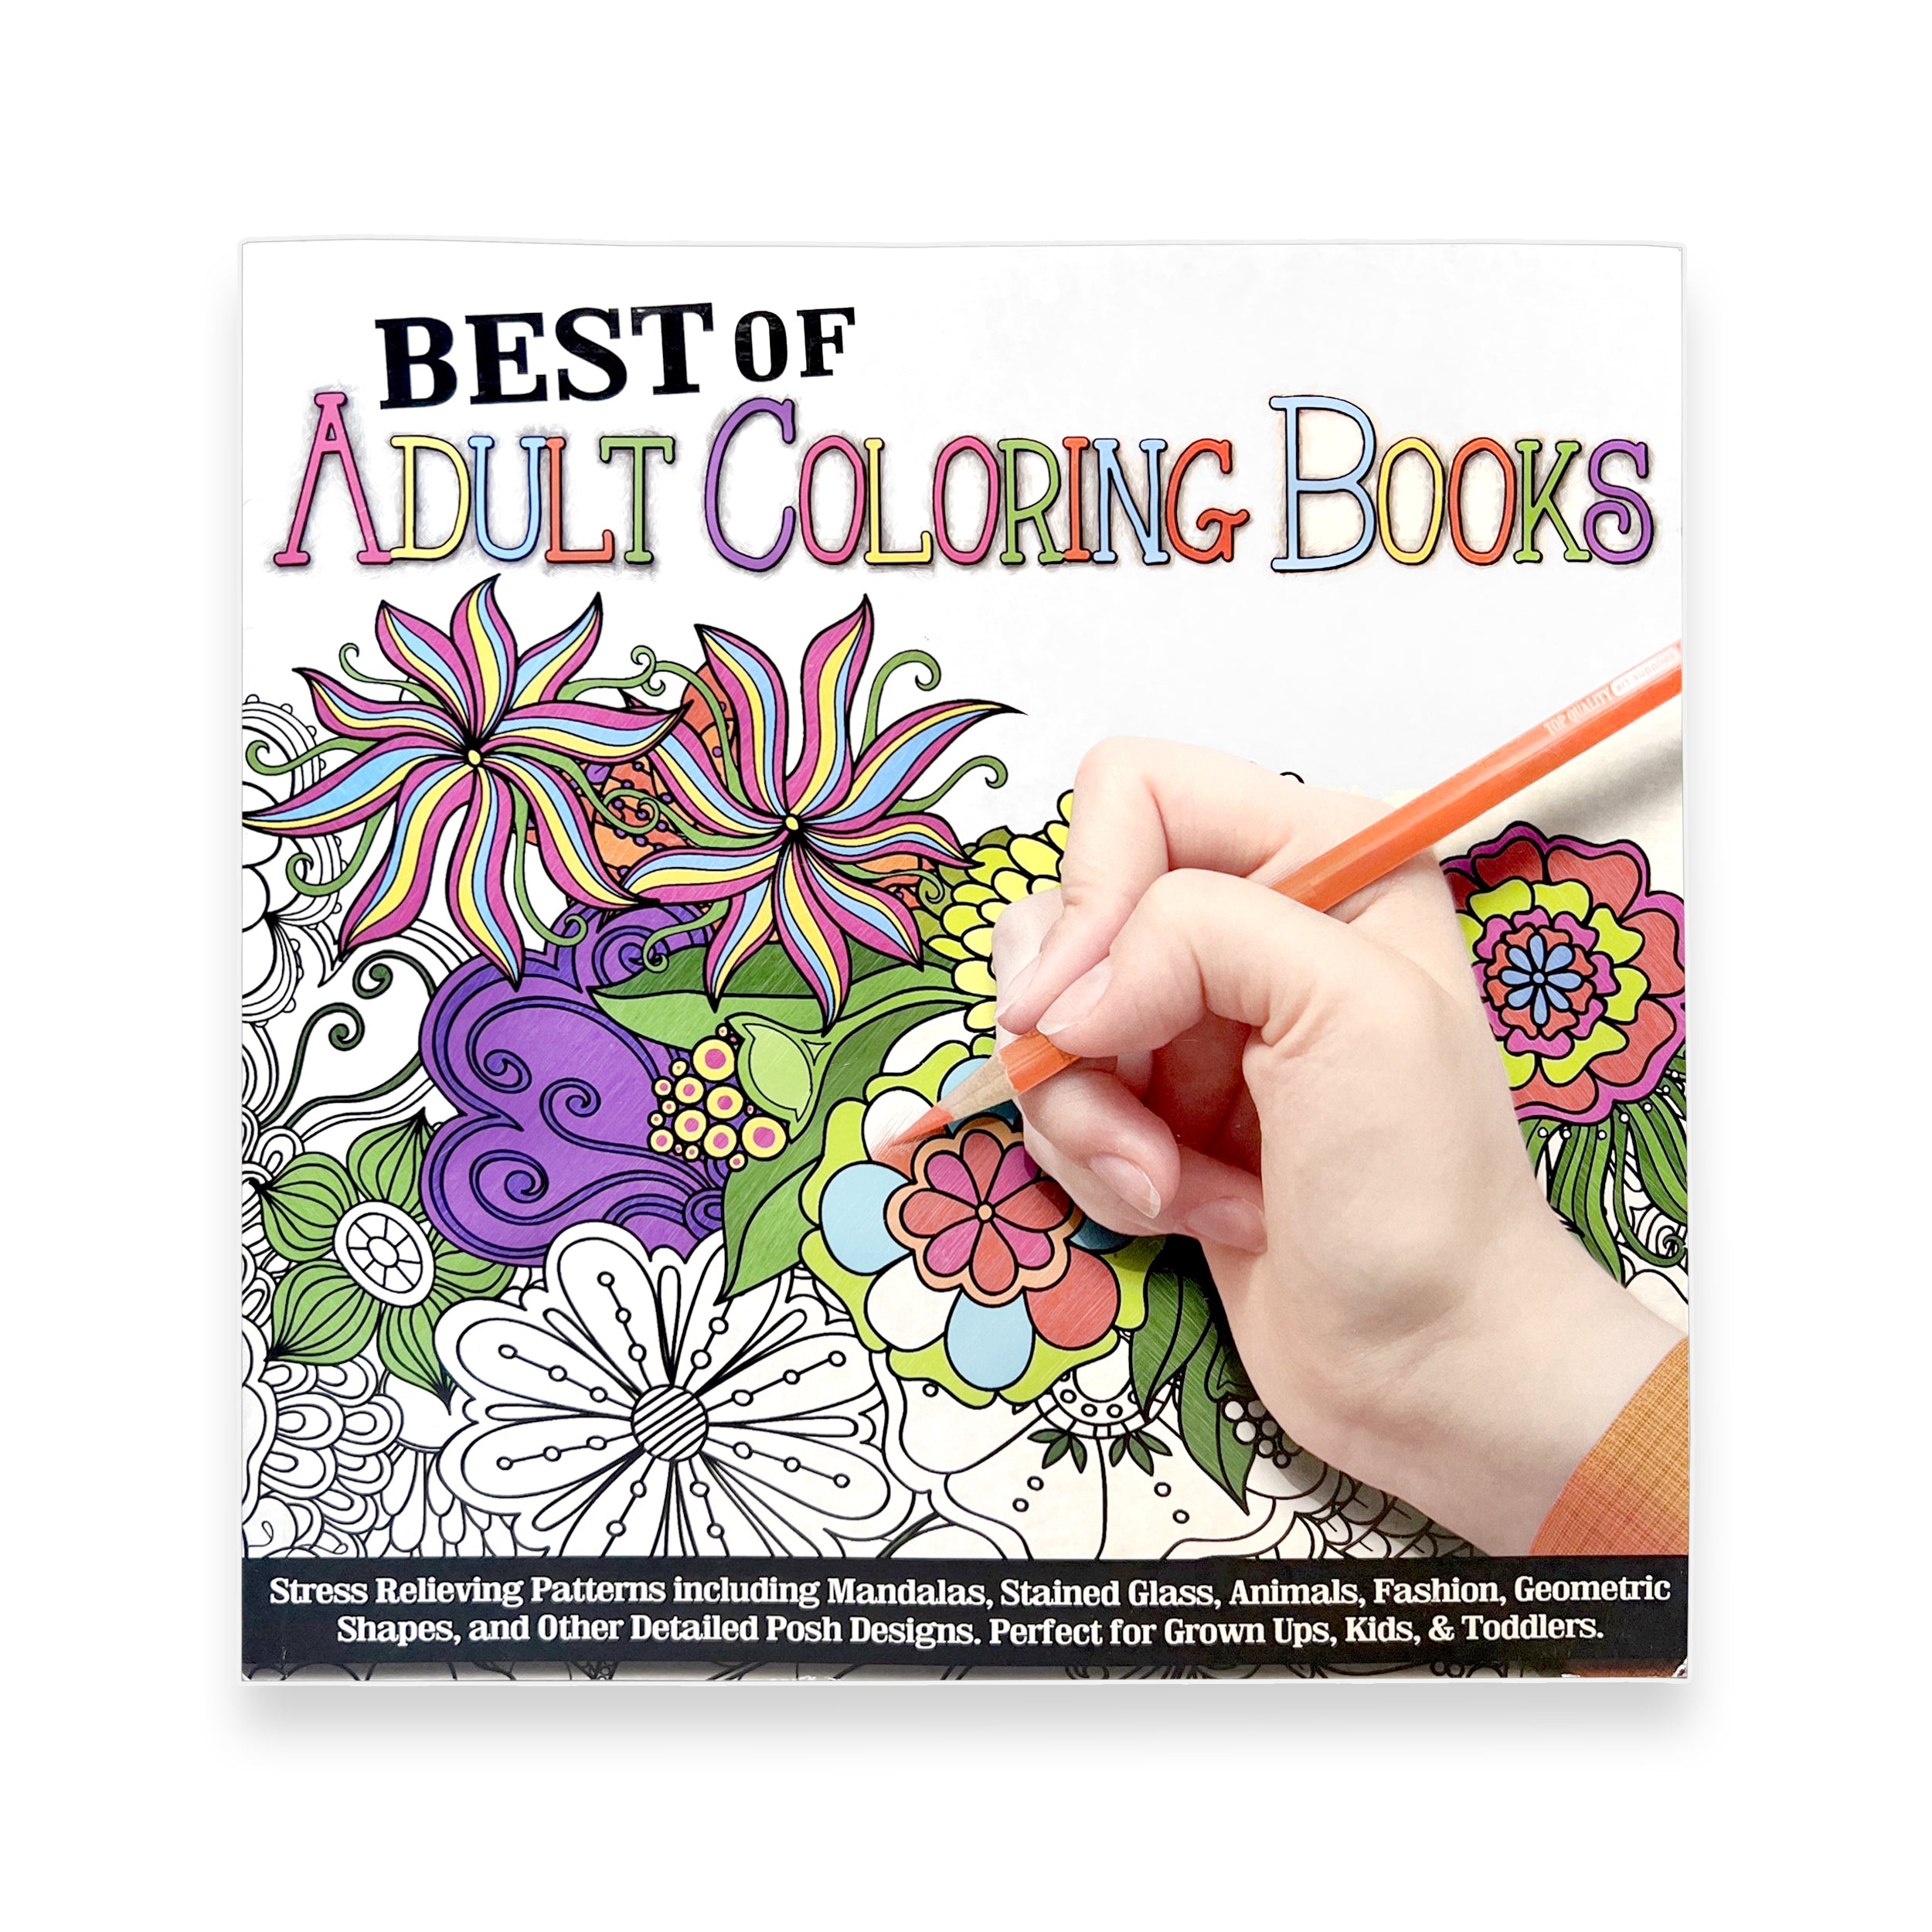 Best of Adult Coloring Books - 33 Designs